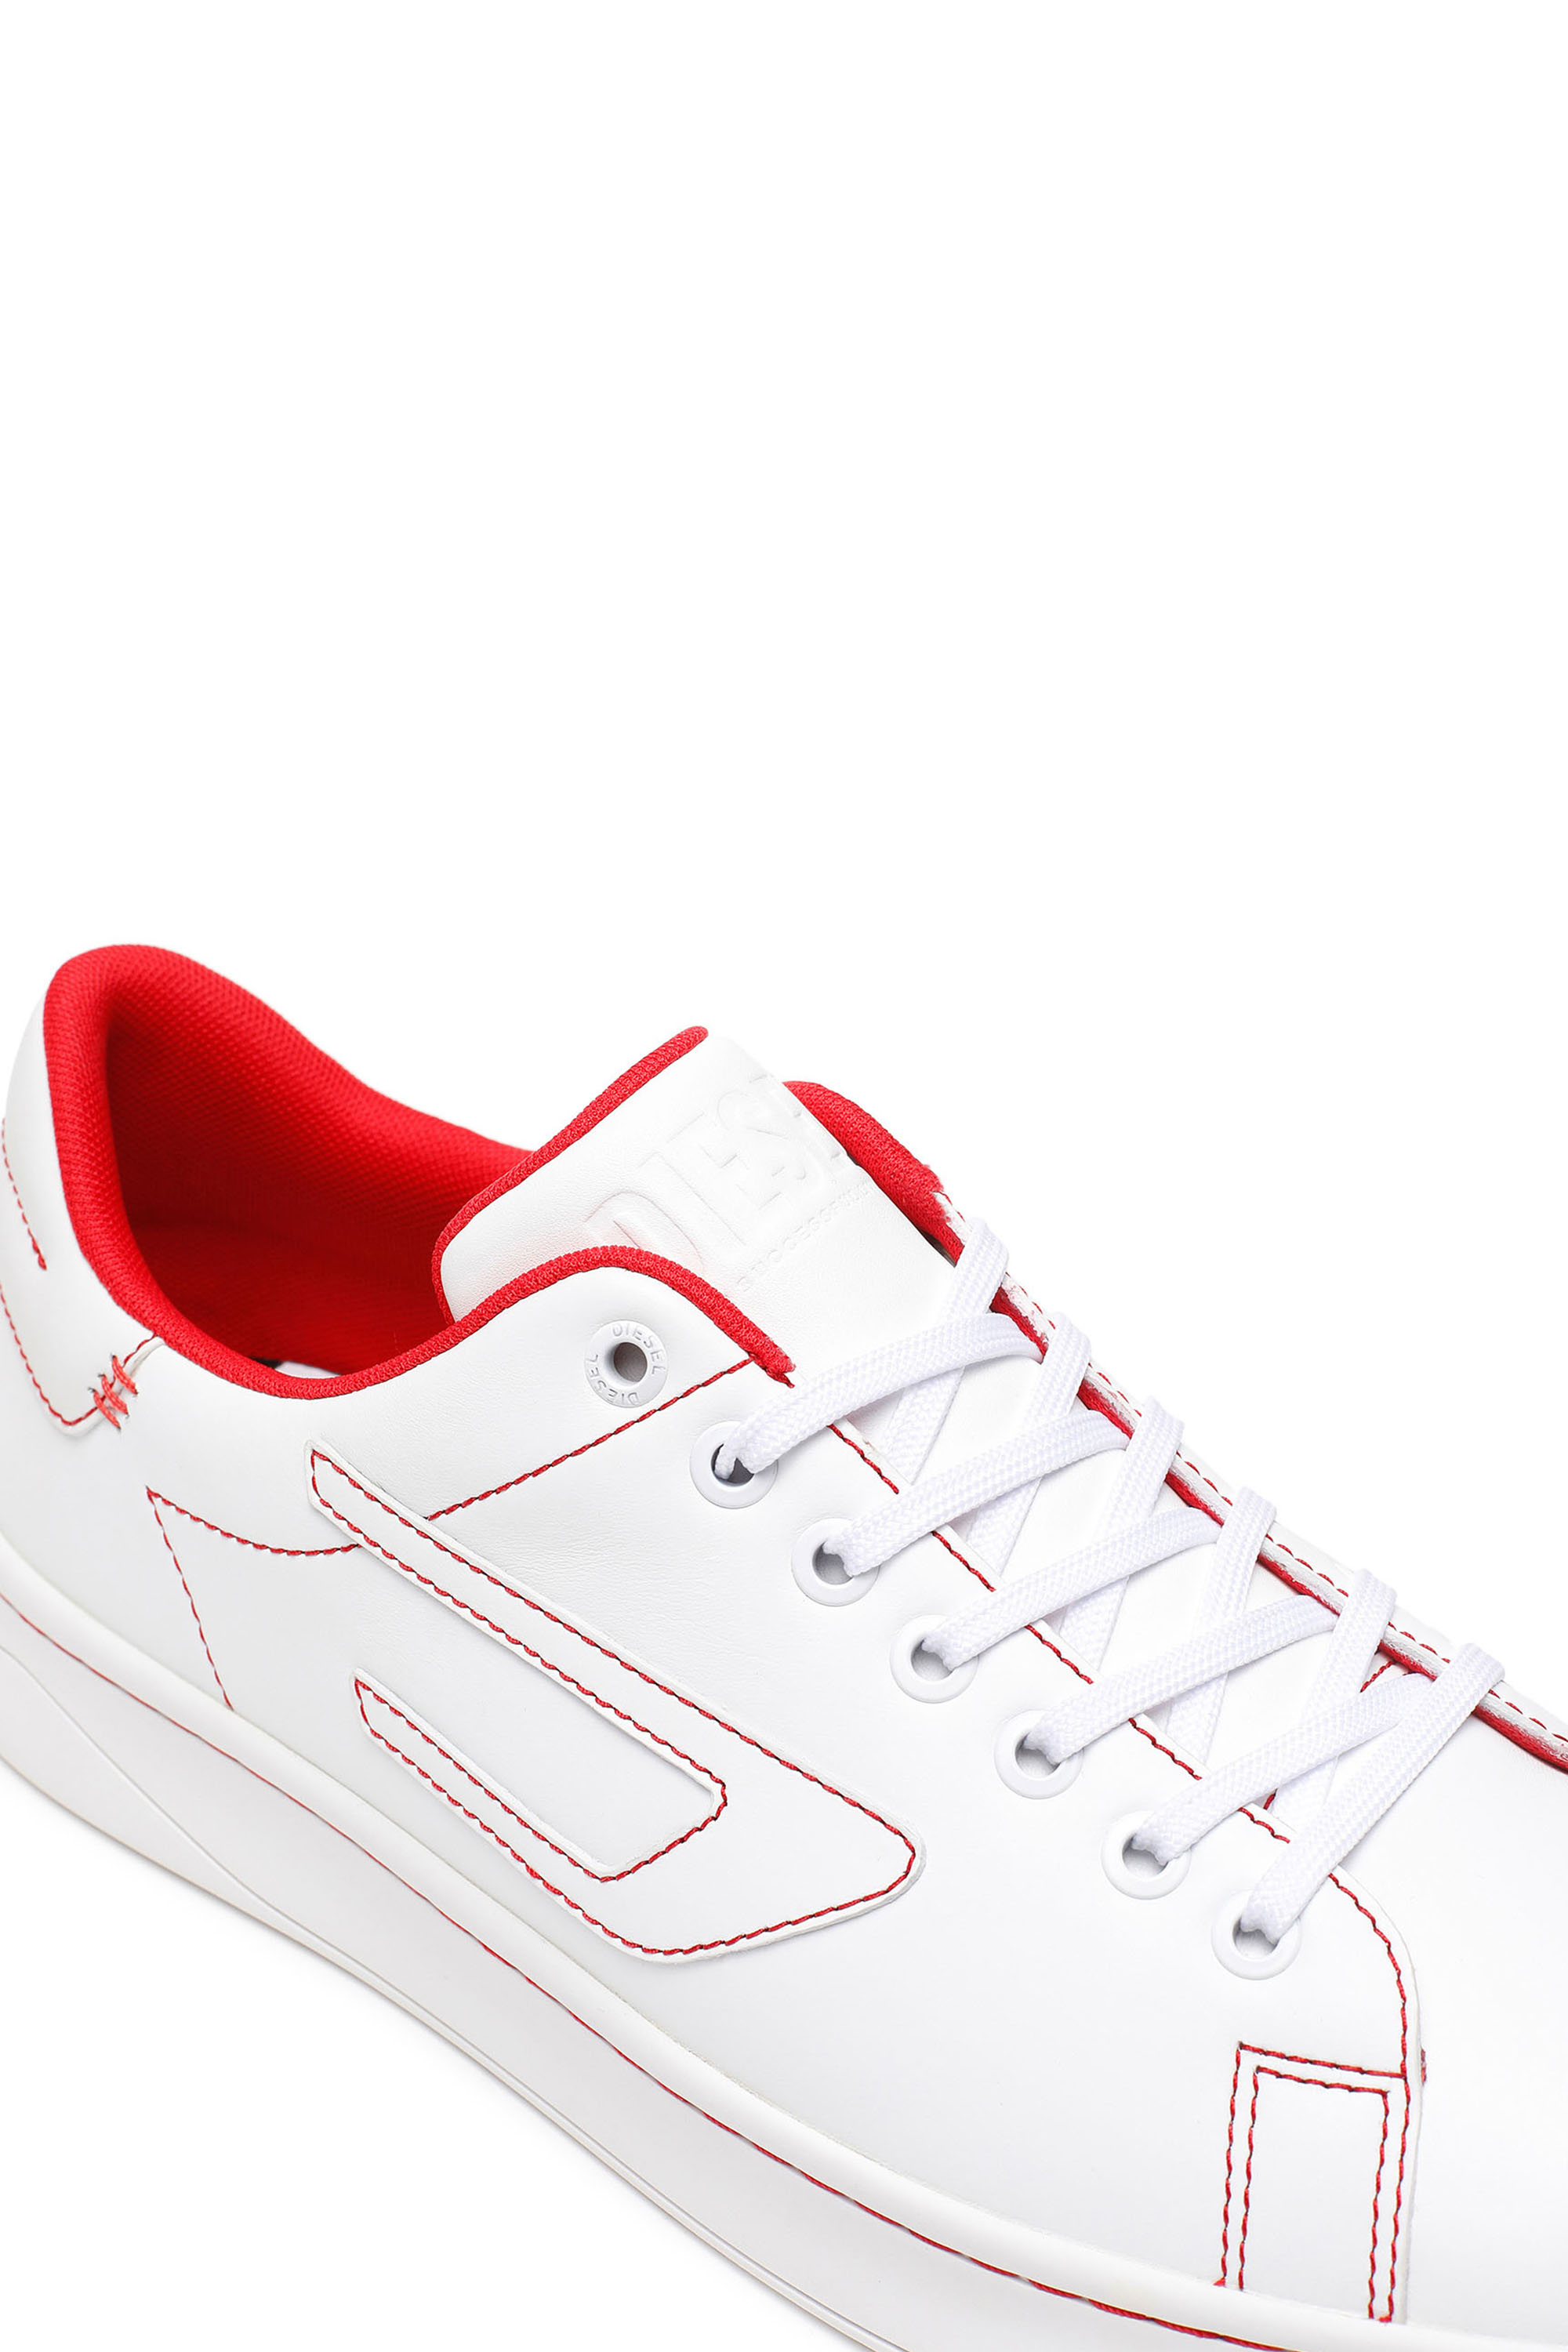 Diesel - S-ATHENE LOW, Man S-Athene Low - Sneakers with contrast stitching in Multicolor - Image 6